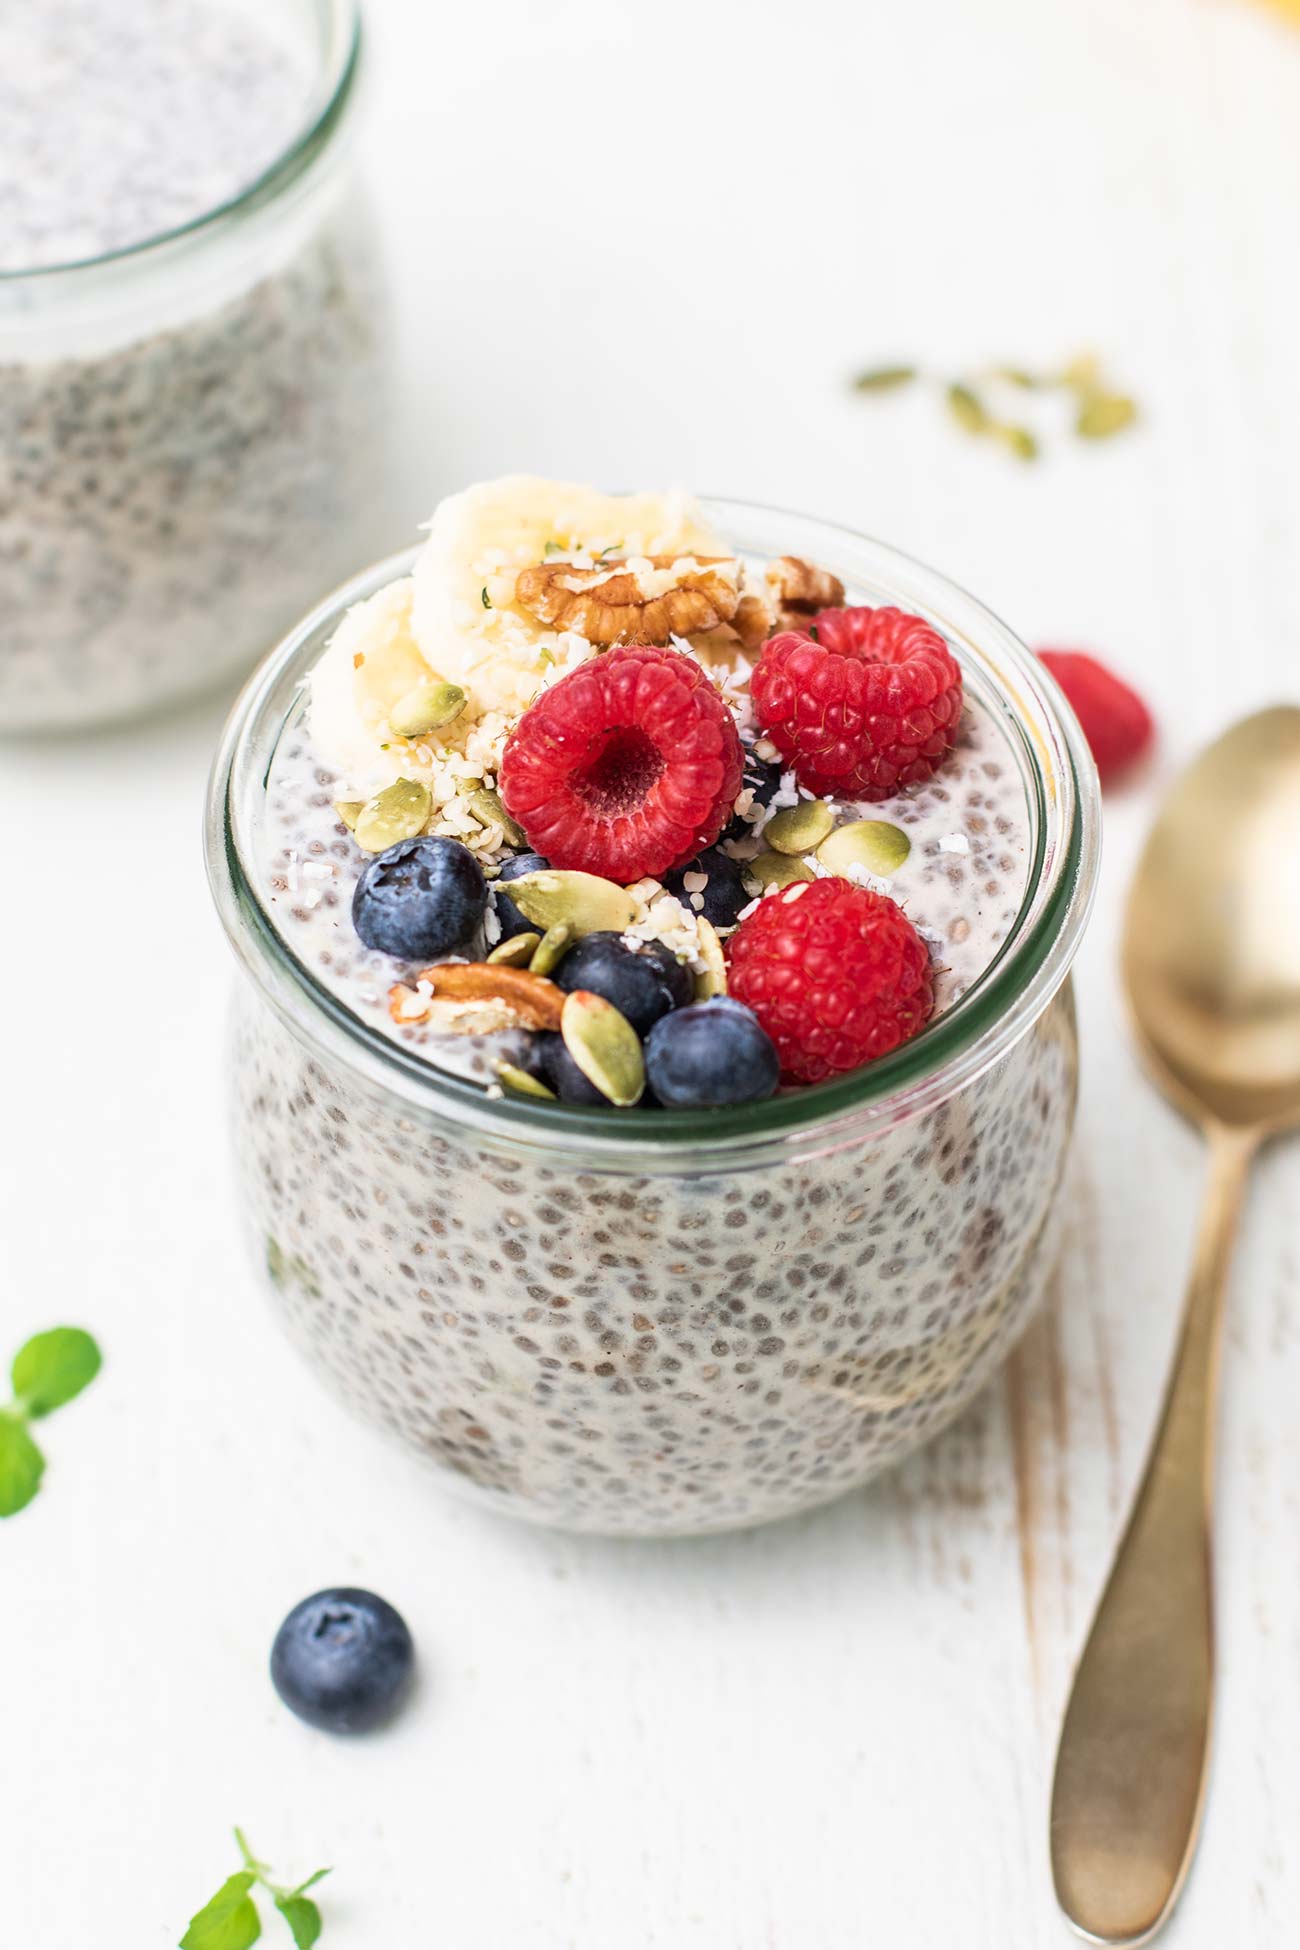 https://sunkissedkitchen.com/wp-content/uploads/2022/01/whole30-chia-pudding-with-toppings.jpg